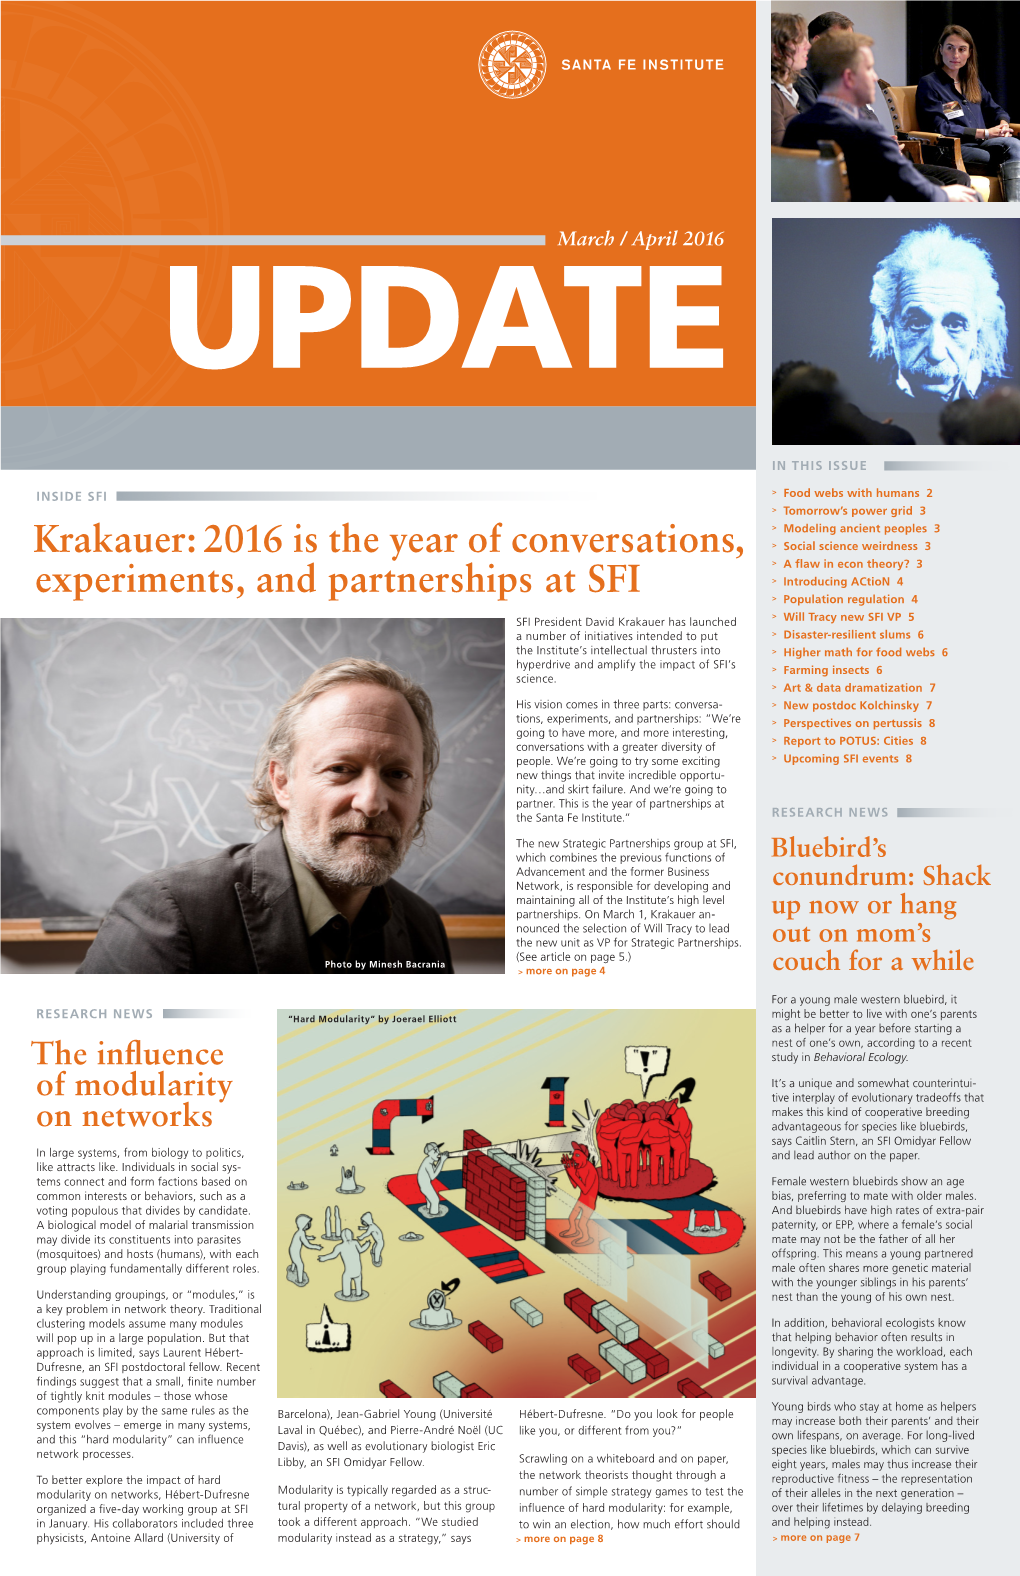 Krakauer: 2016 Is the Year of Conversations, Experiments, And